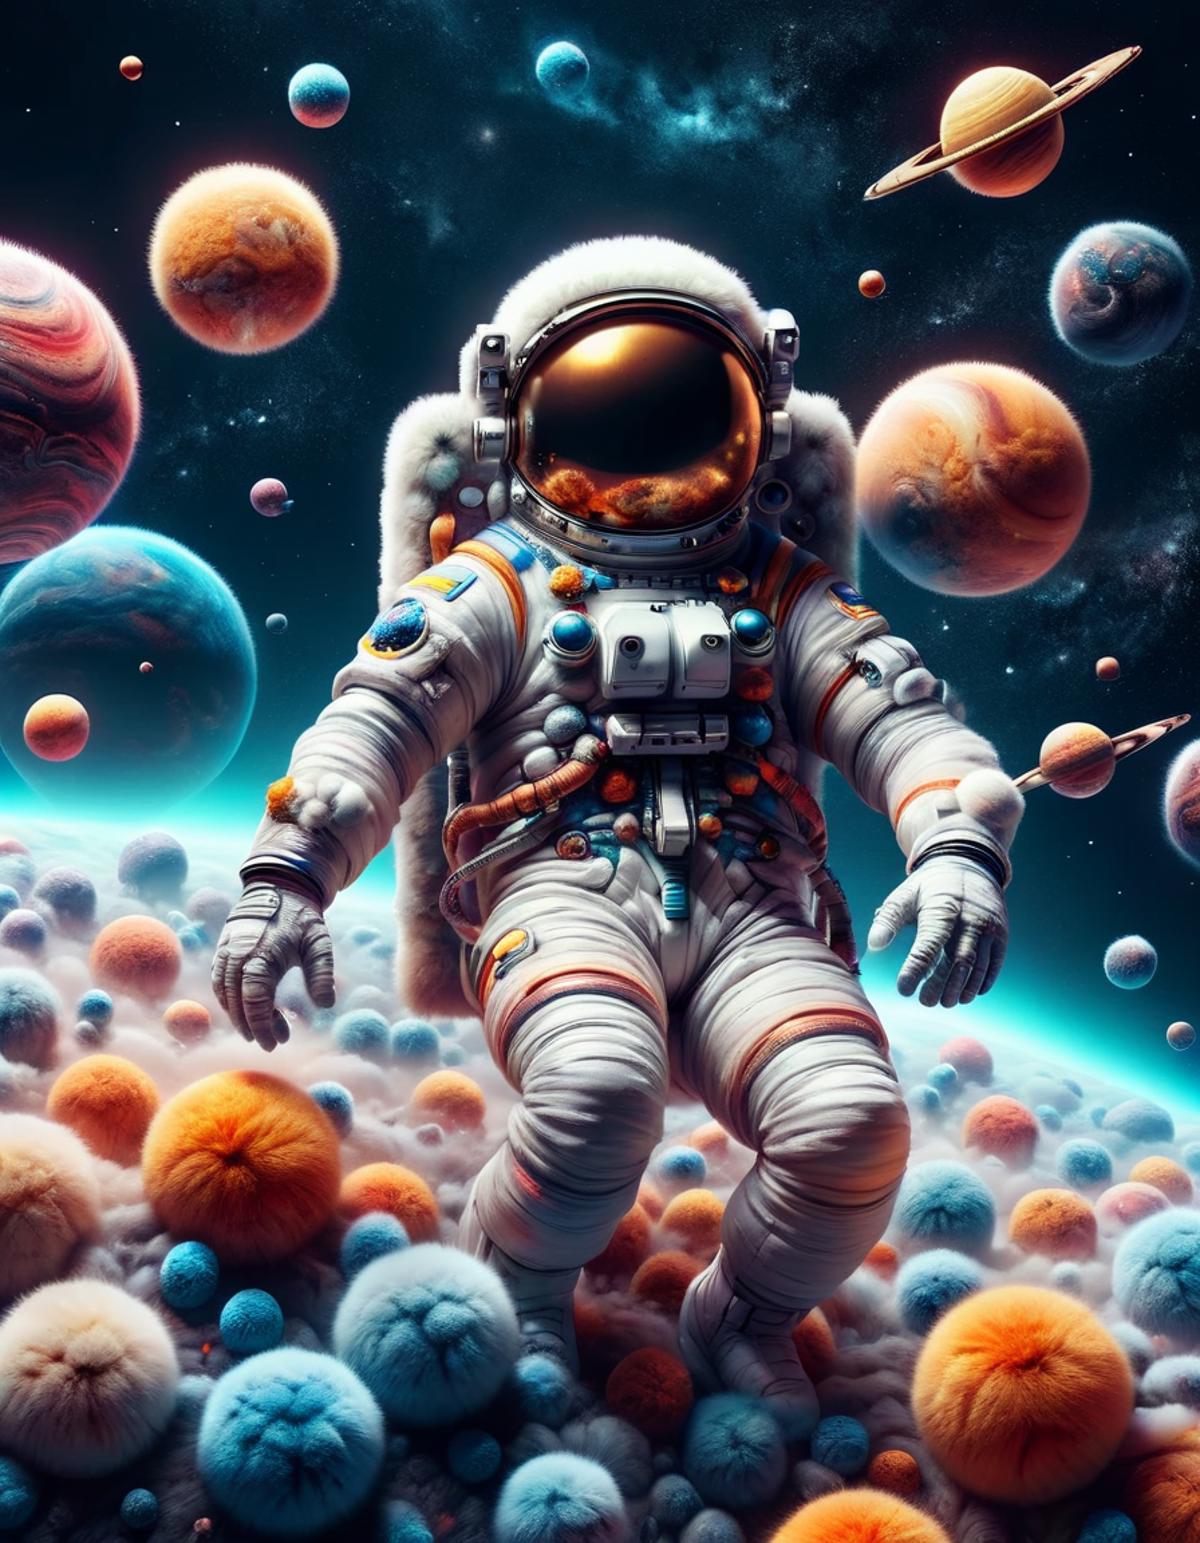 Astronaut in a white suit on a planet surrounded by other planets and celestial objects.